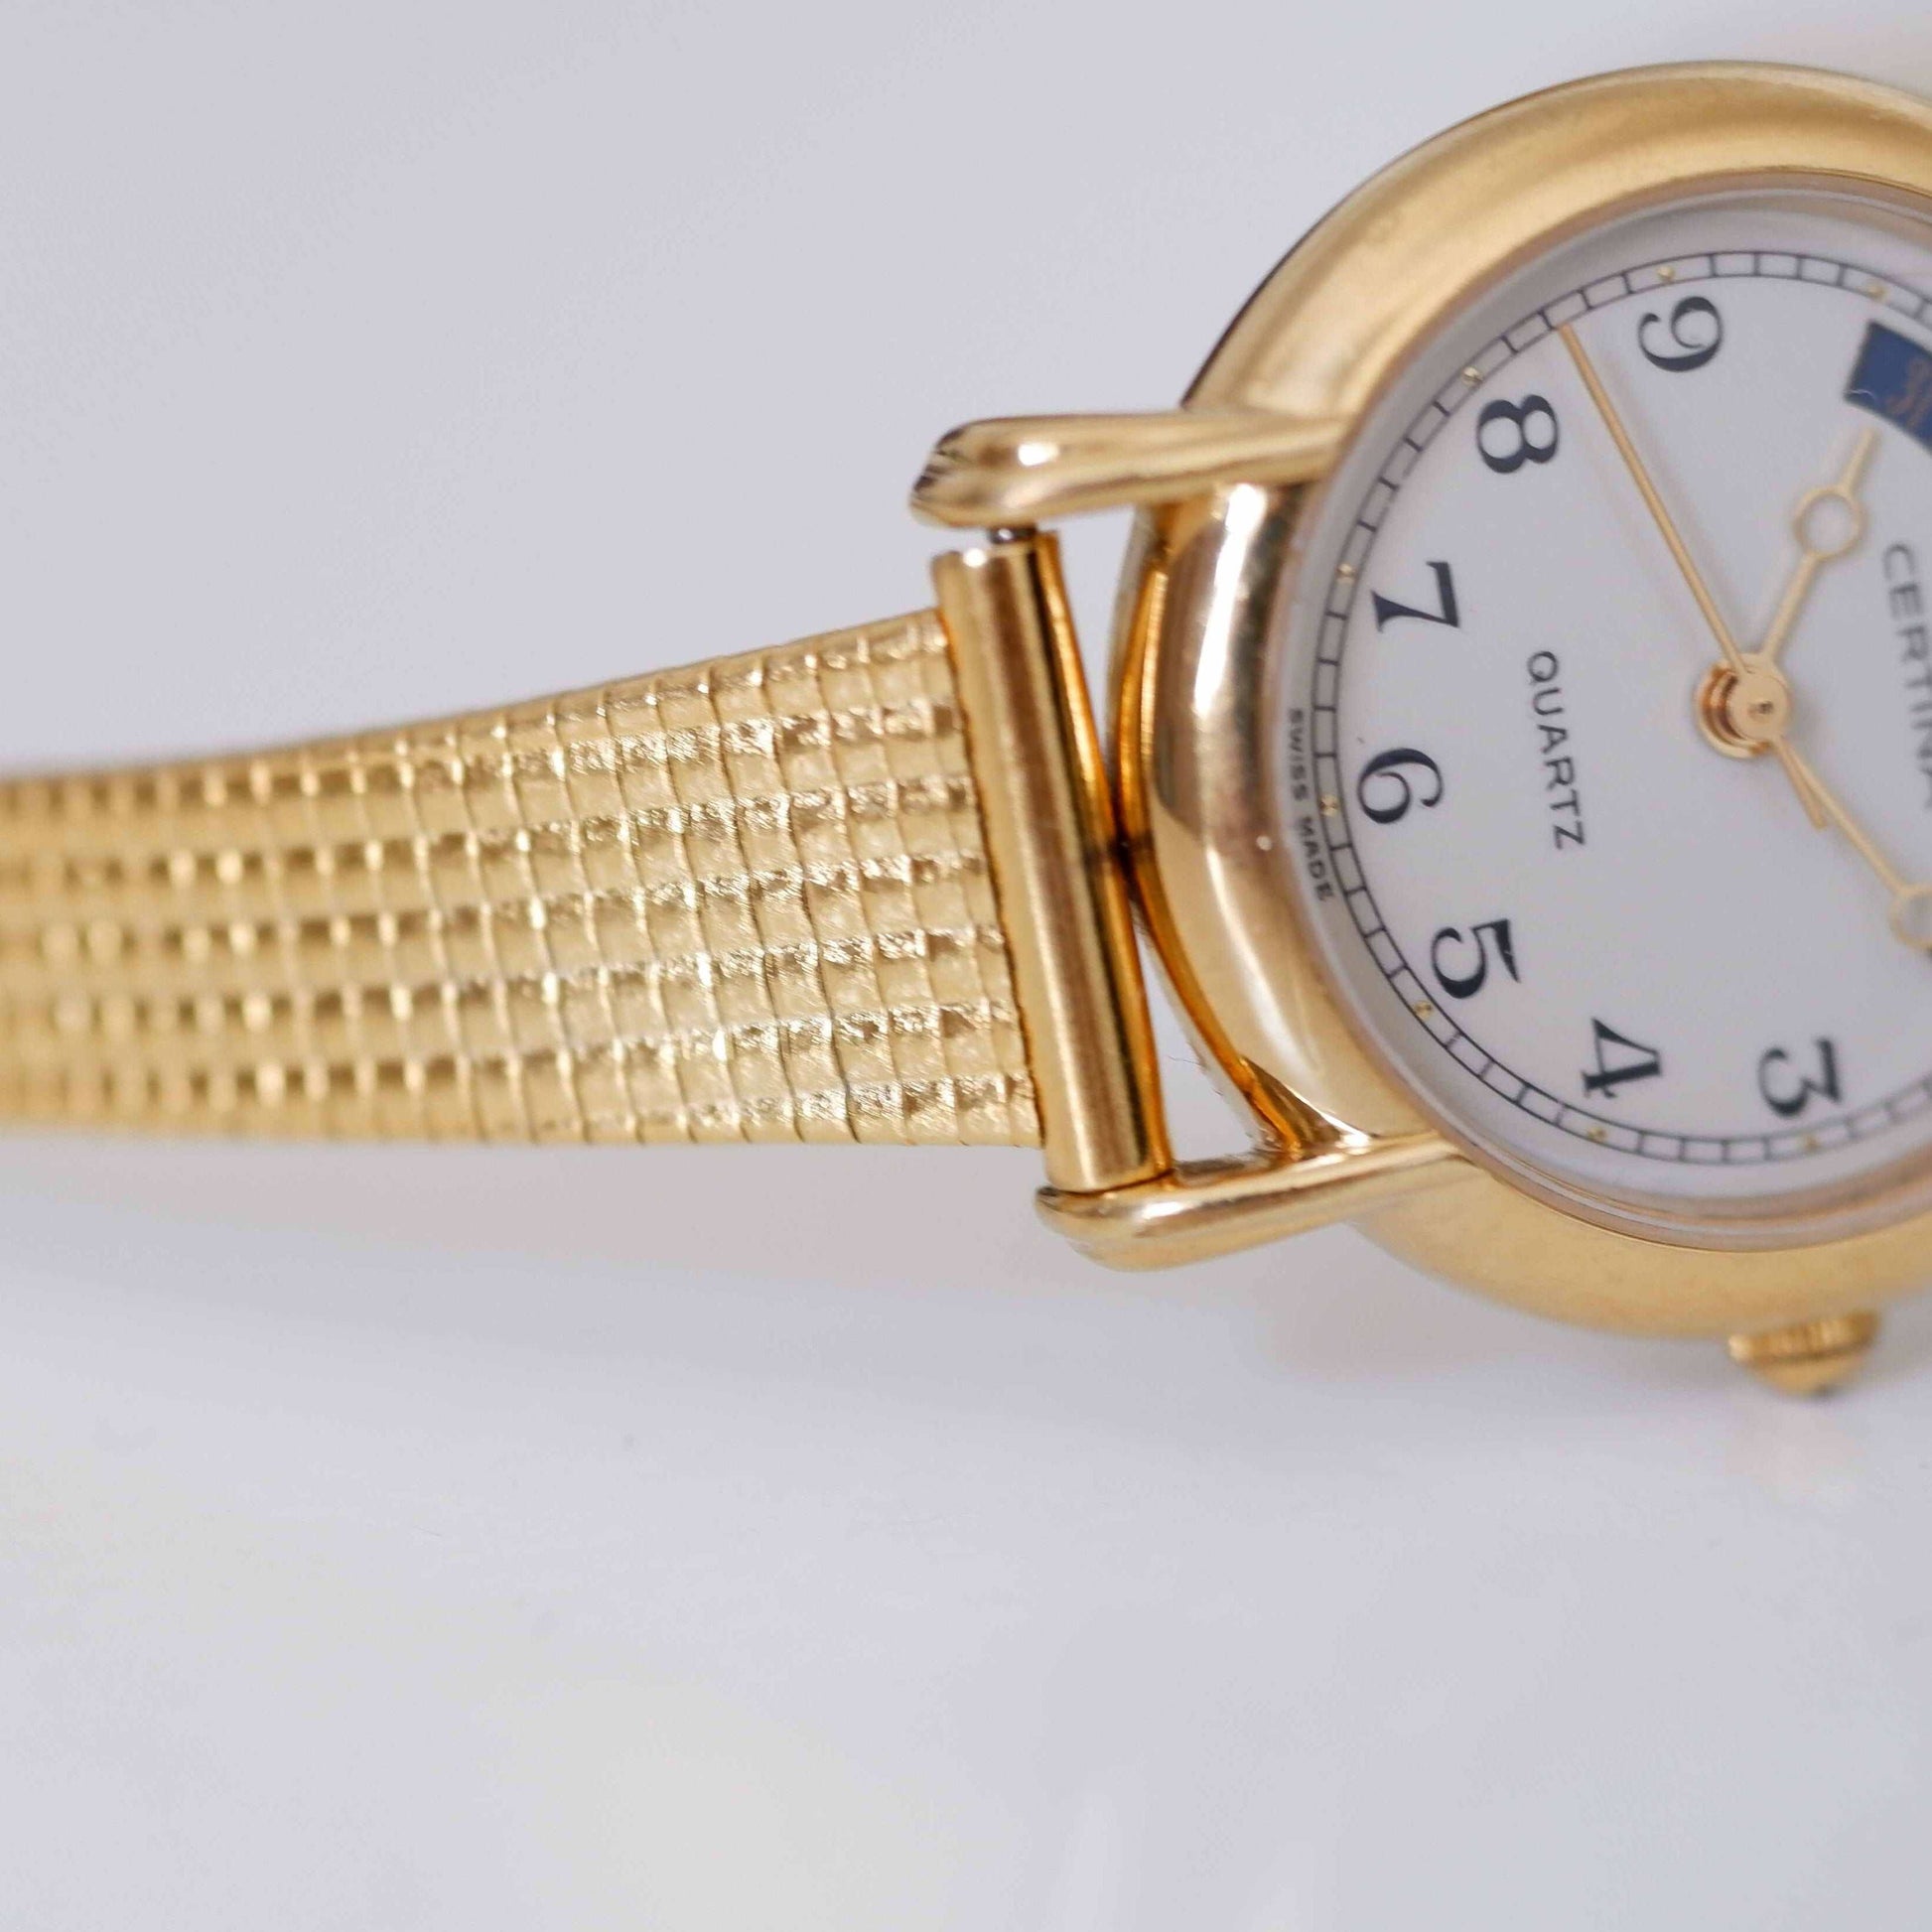 Certina Vintage Ladies Watch: 90s Gold, Blue Date and Classic Numerals, Bracelet